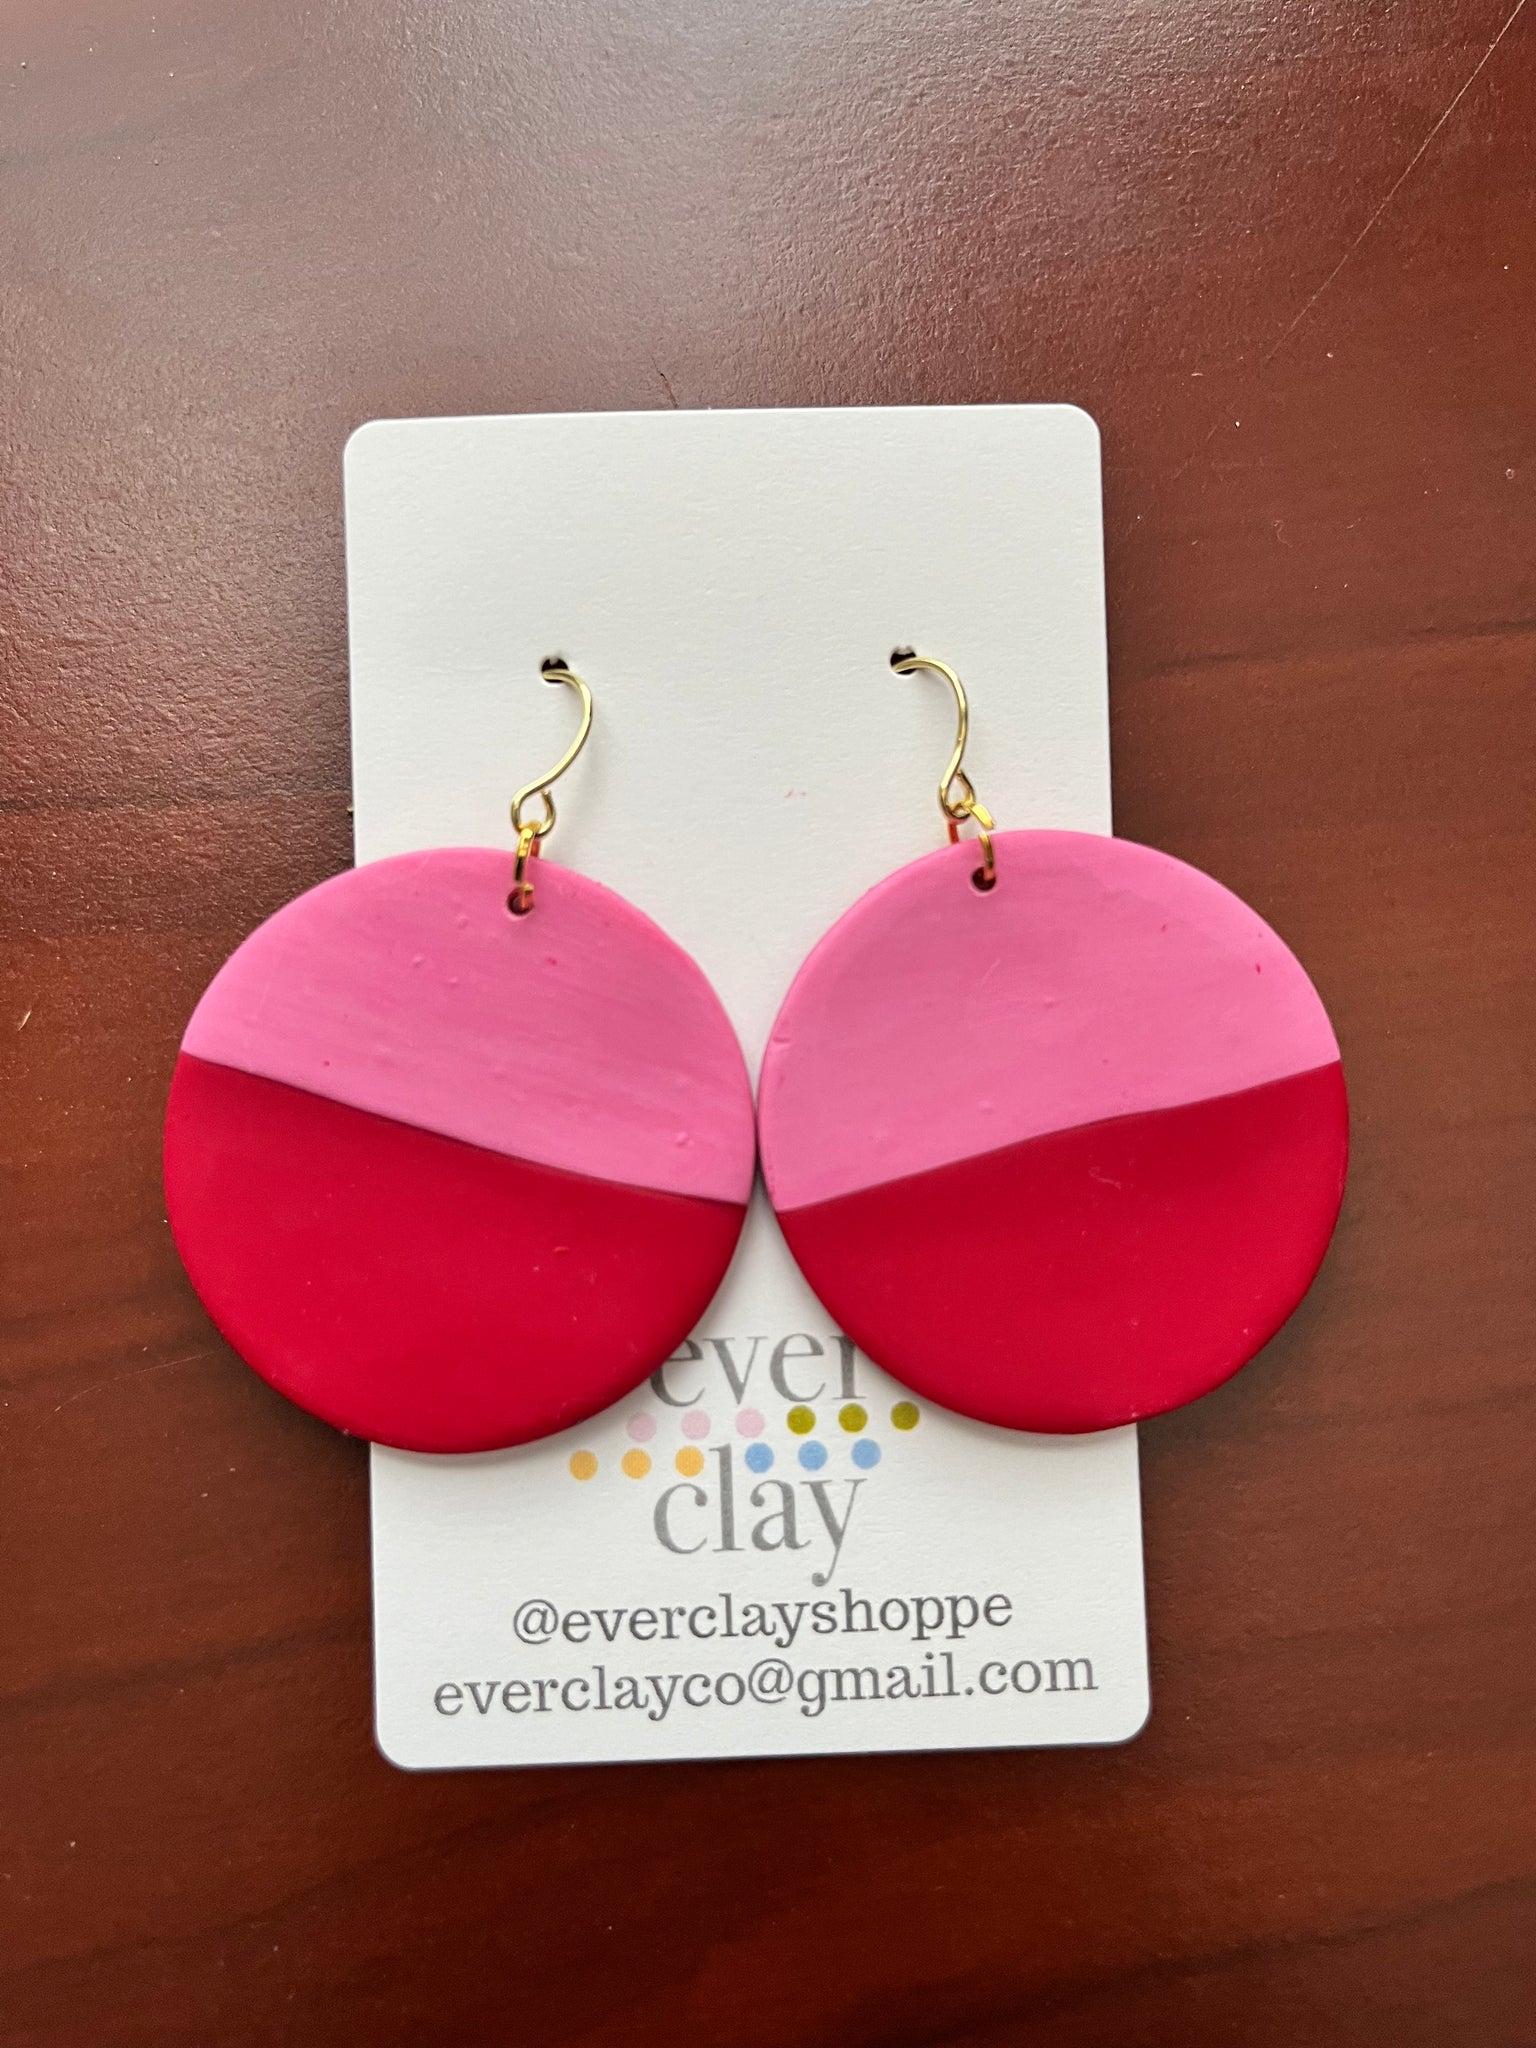 Best Polymer Clay for Earrings and Jewelry - Sarah Maker